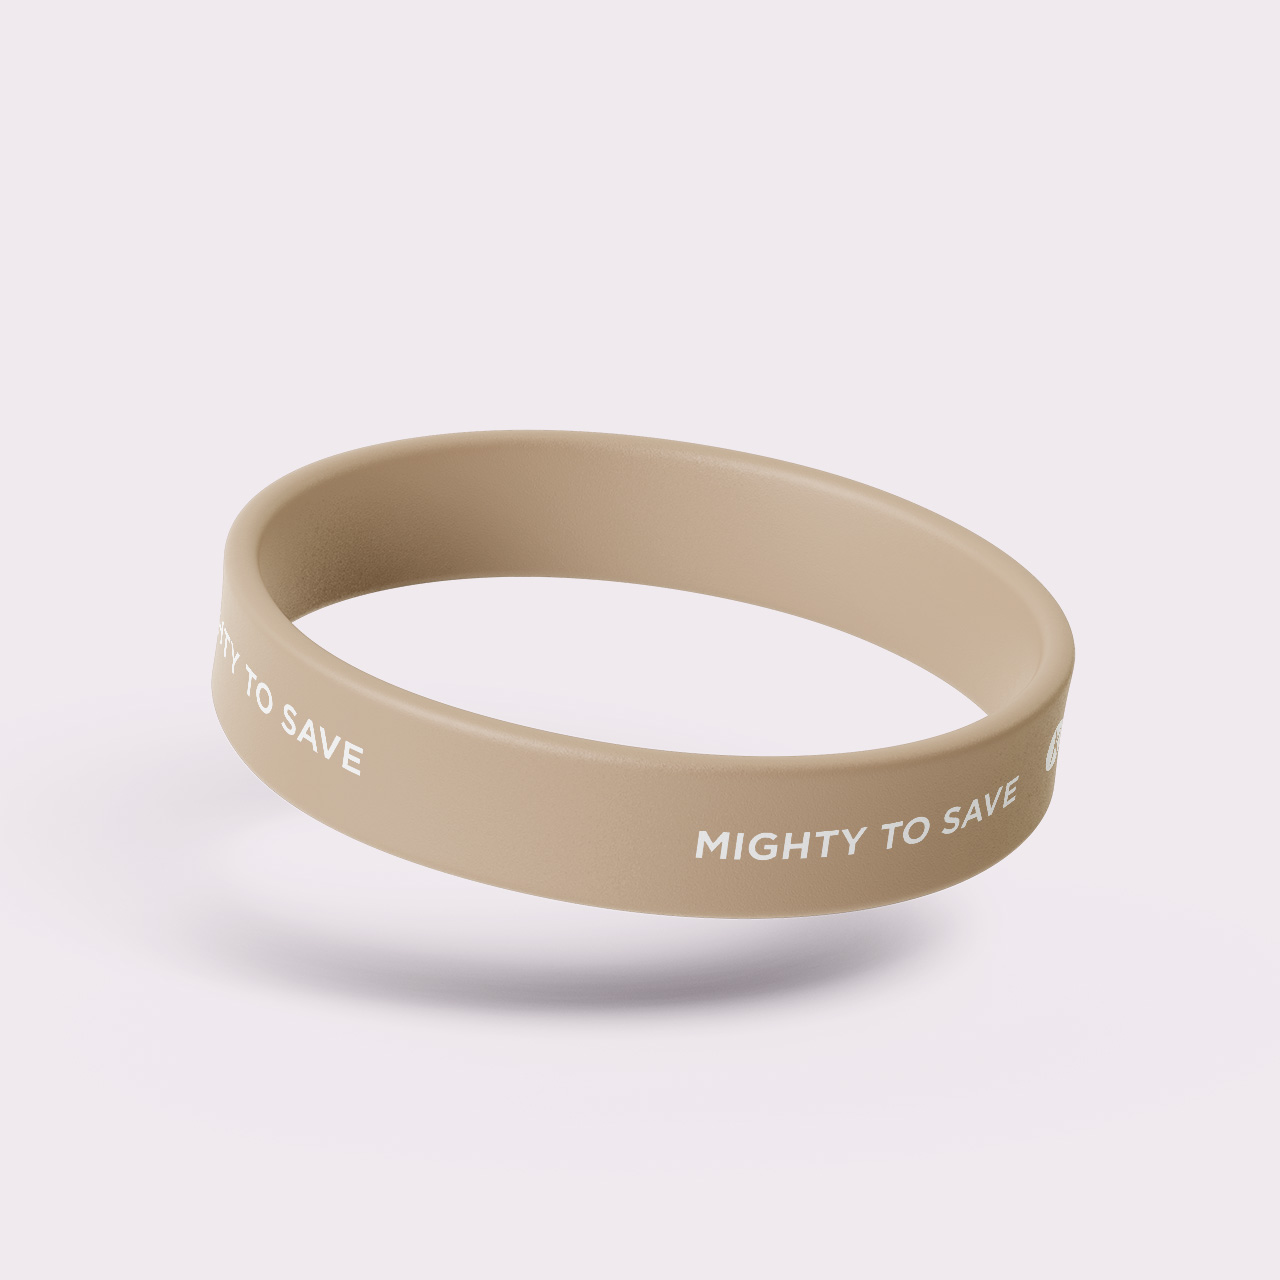 OW41005 – Siliconen armband – Mighty to save